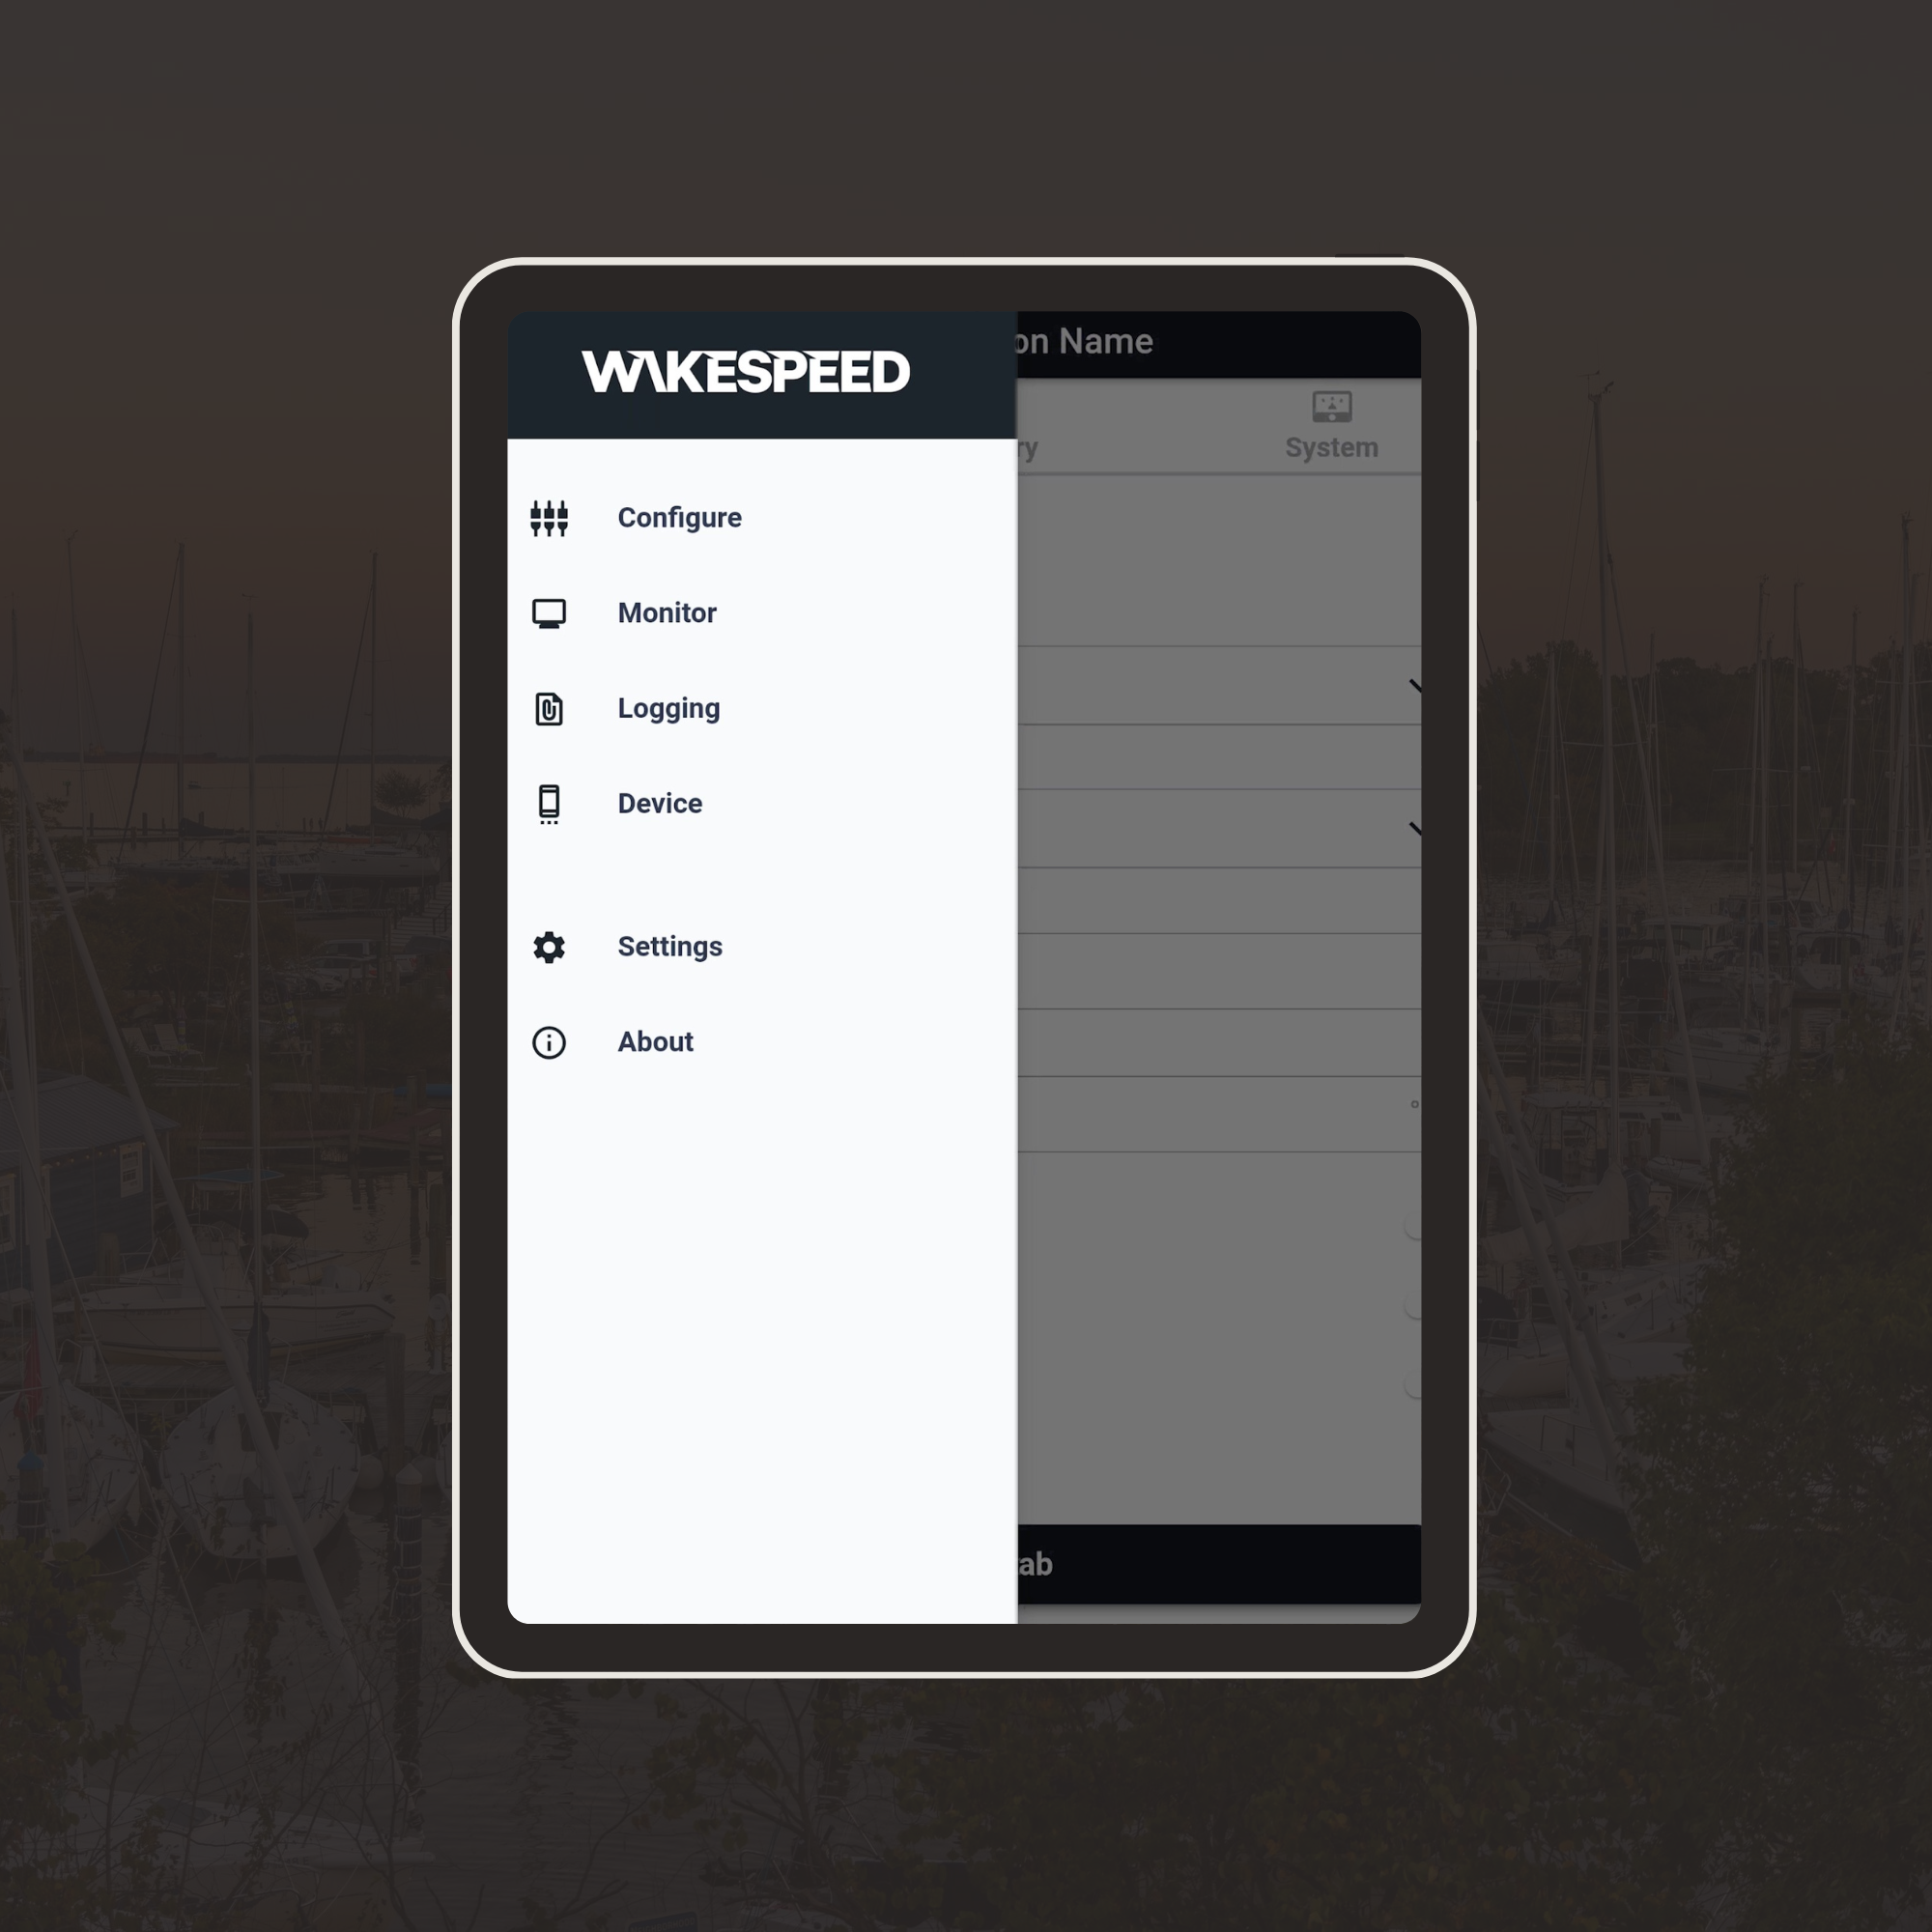 Wakespeed Configuration and Monitoring Utility App